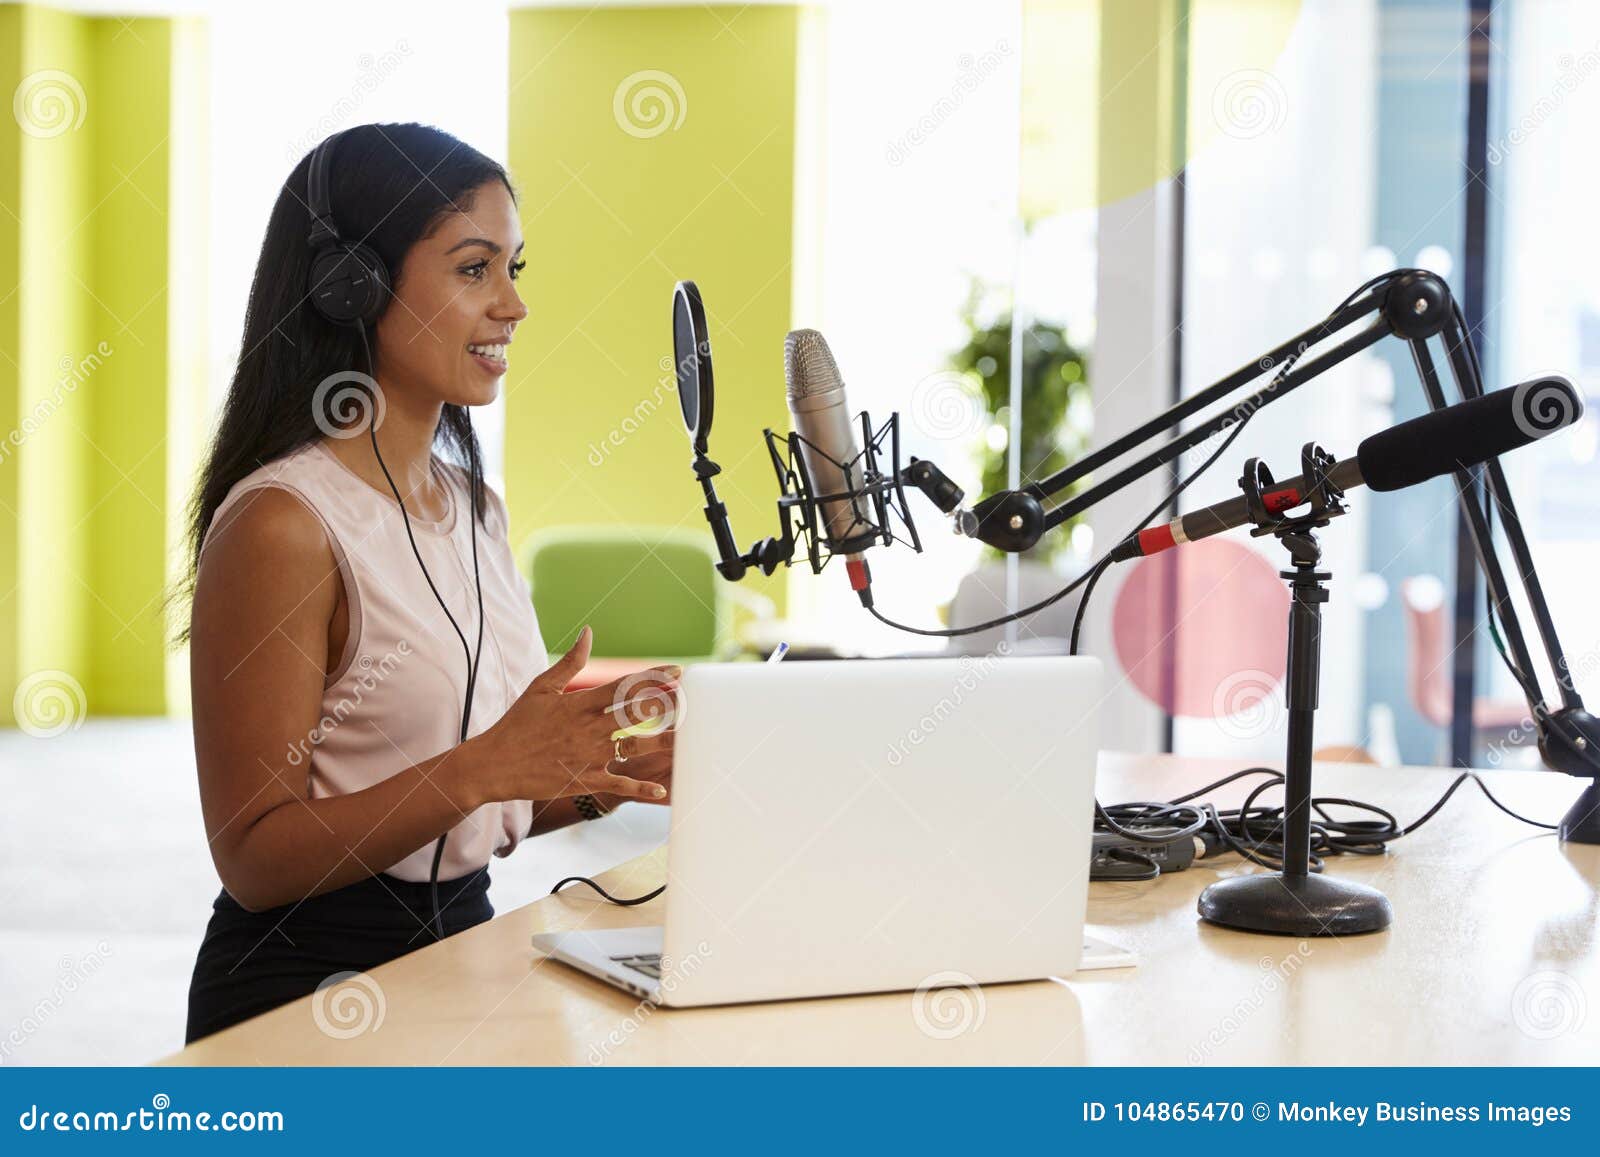 young mixed race woman recording a podcast in a studio